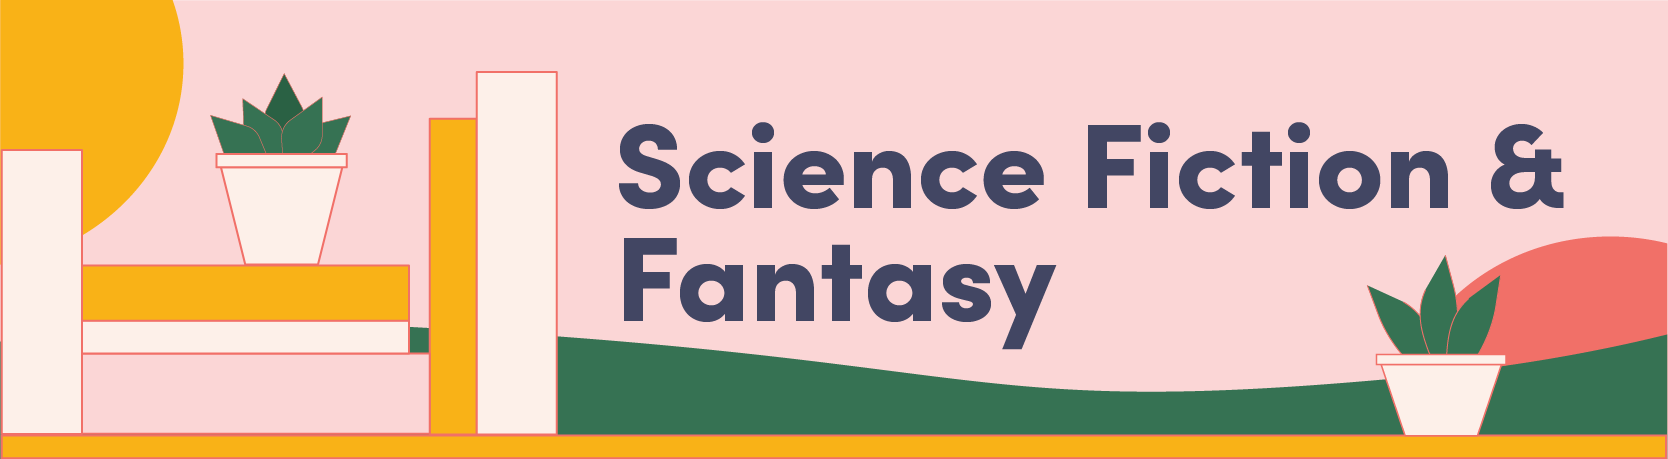 science fiction and fantasy